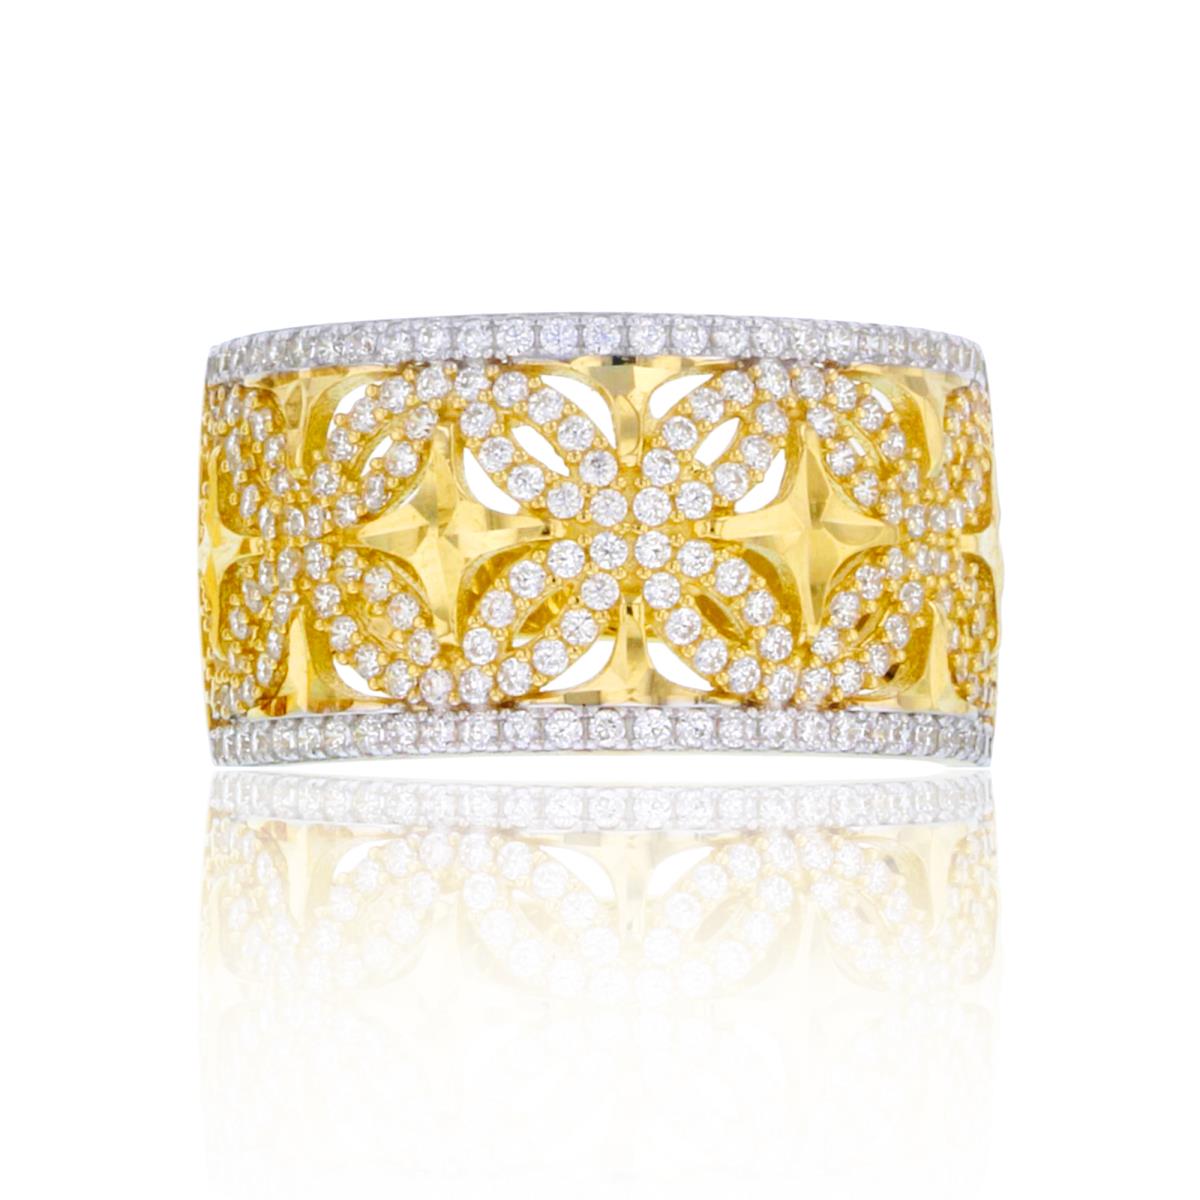 10K Two-Tone Gold 11.75mm Wide Micropave Fashion Ring